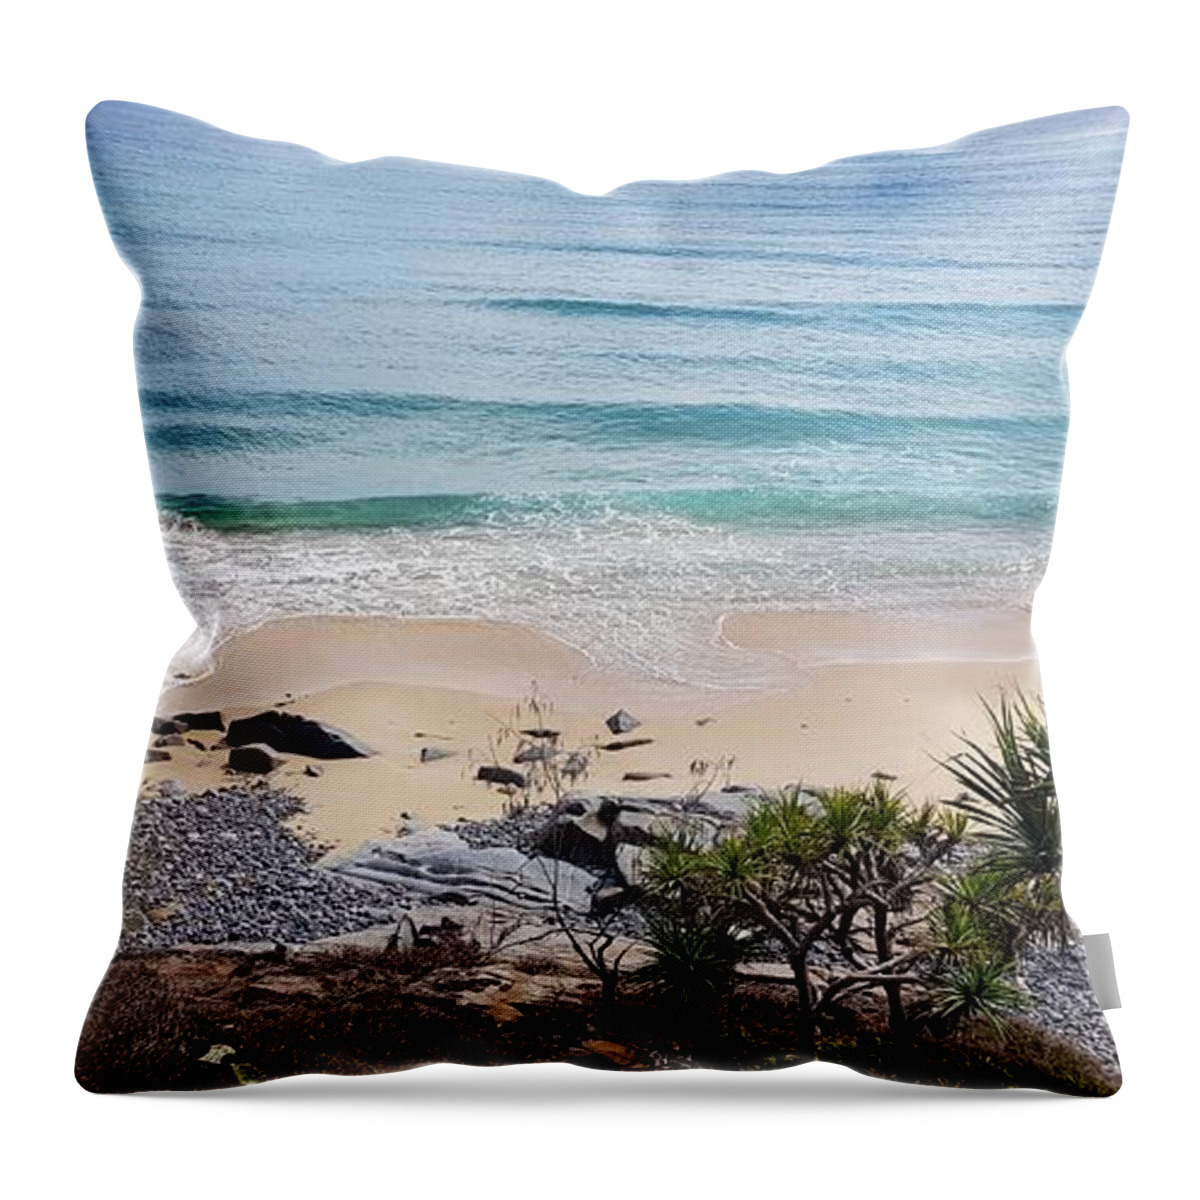 Landscape Throw Pillow featuring the photograph Beautiful Noosa Beach by Cassy Allsworth